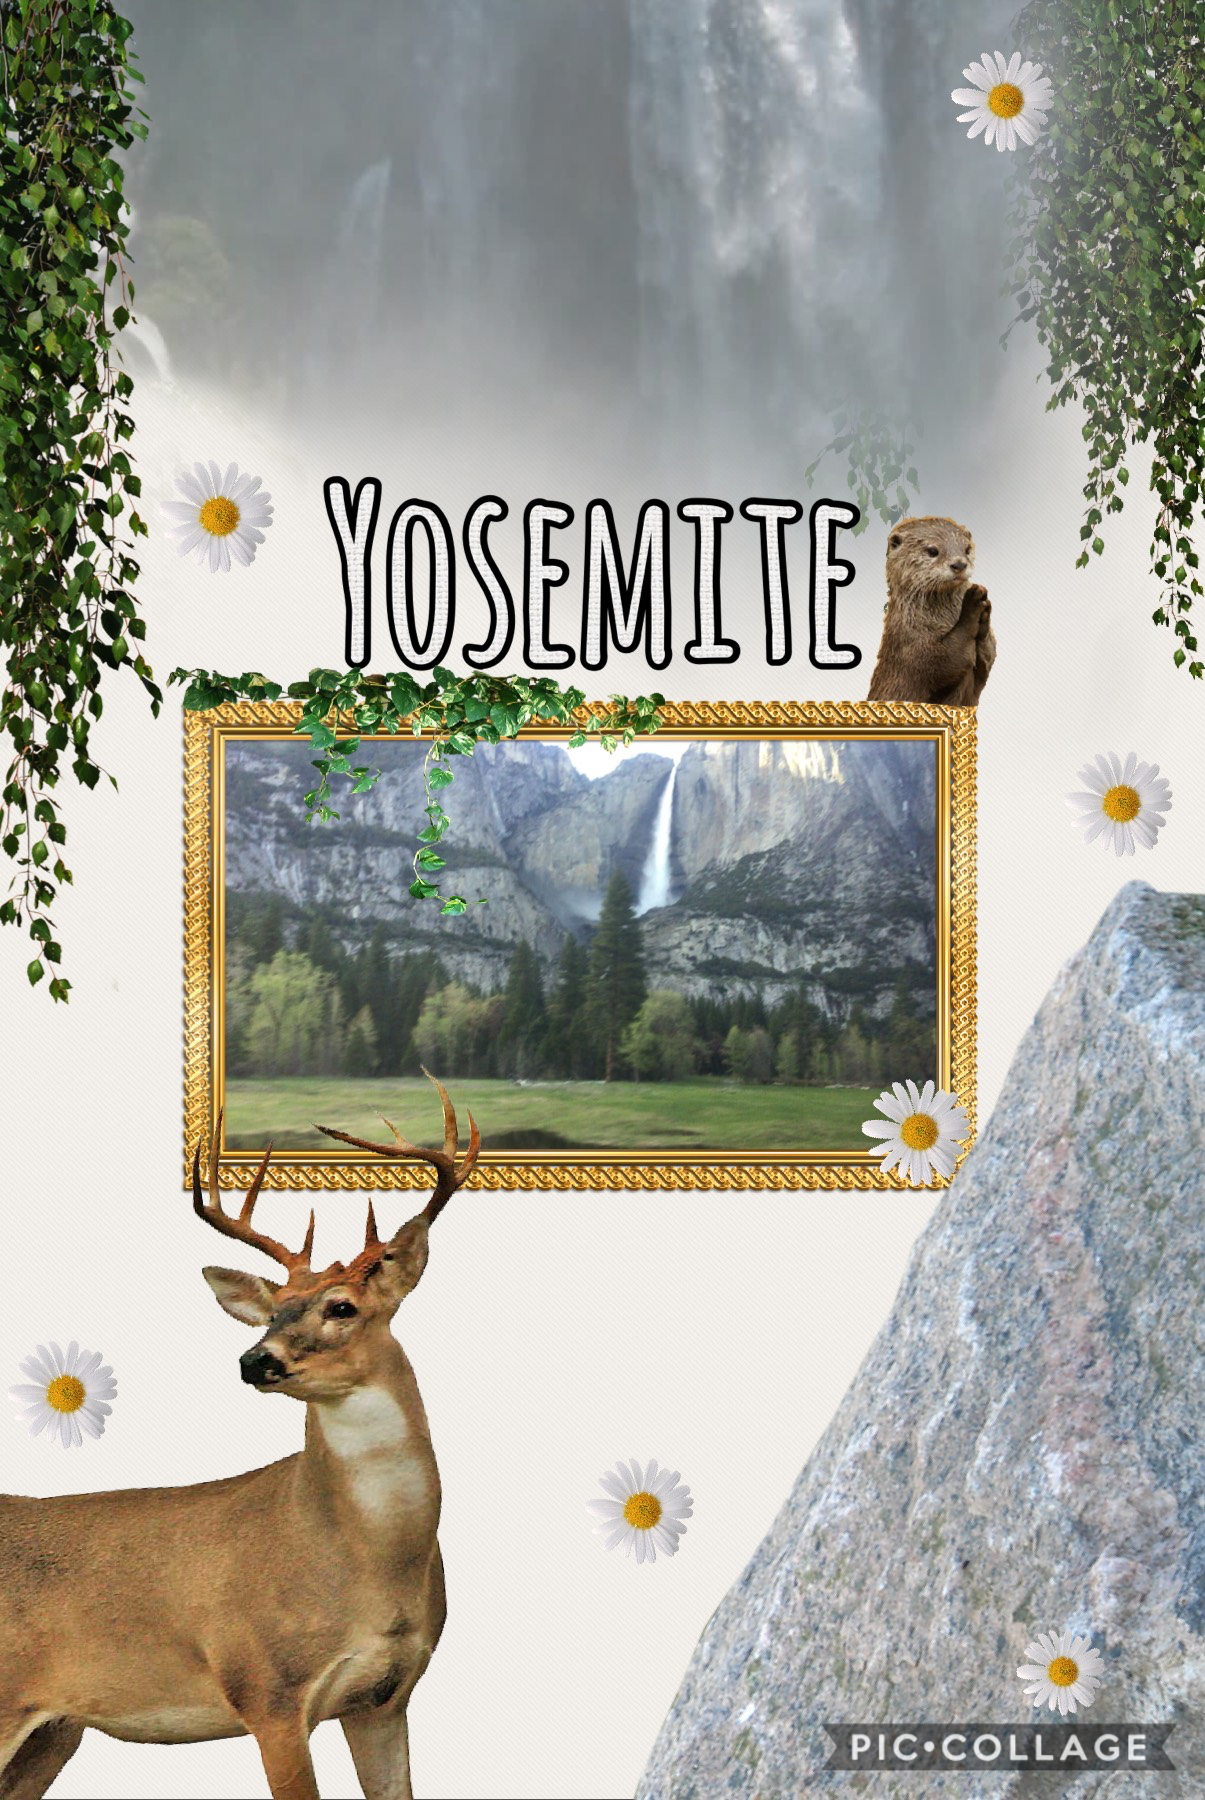 I went to Yosemite National Park last week and it was an amazing experience, nature is so majestic that you get to enjoy every moment you are there. If you ever have the opportunity of going to the park don’t think about going home so you get to enjoy eve